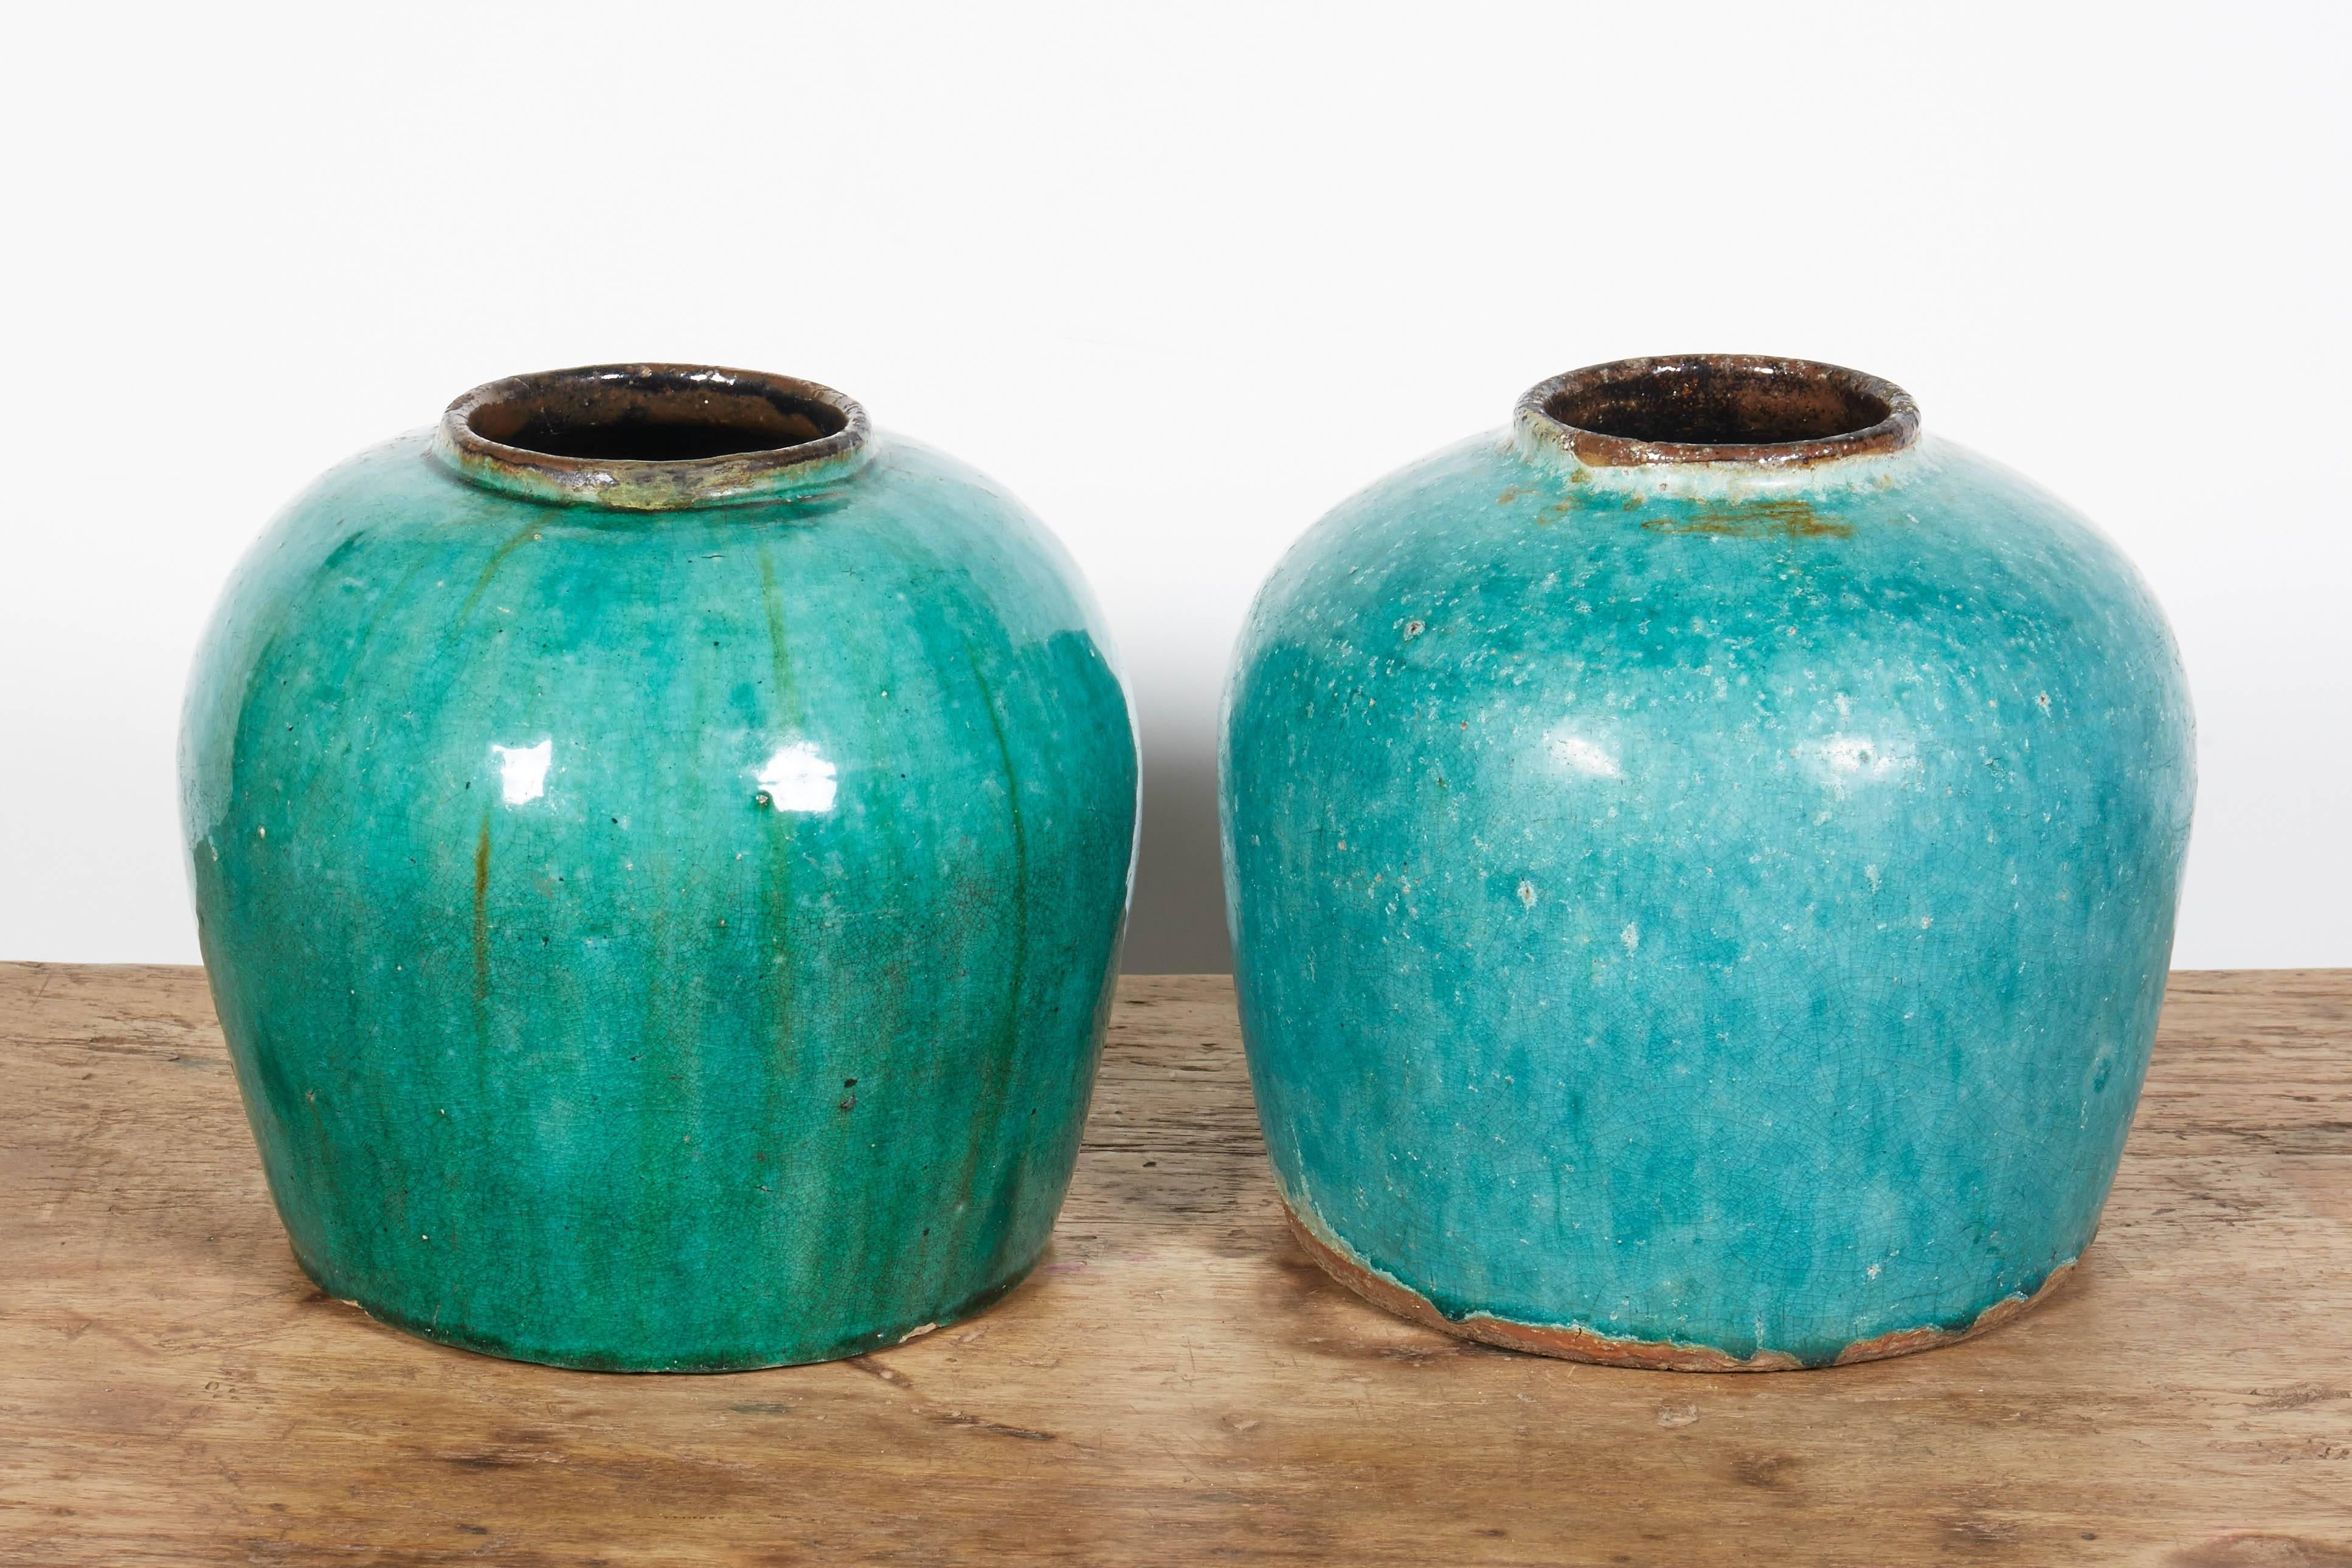 Antique Chinese ceramic ginger jars, classically shaped and beautifully glazed. From Hunan Province, circa 1880. Priced individually. Sizes vary somewhat.
Only one piece available. The RIGHT jar in main image.
CR749
 